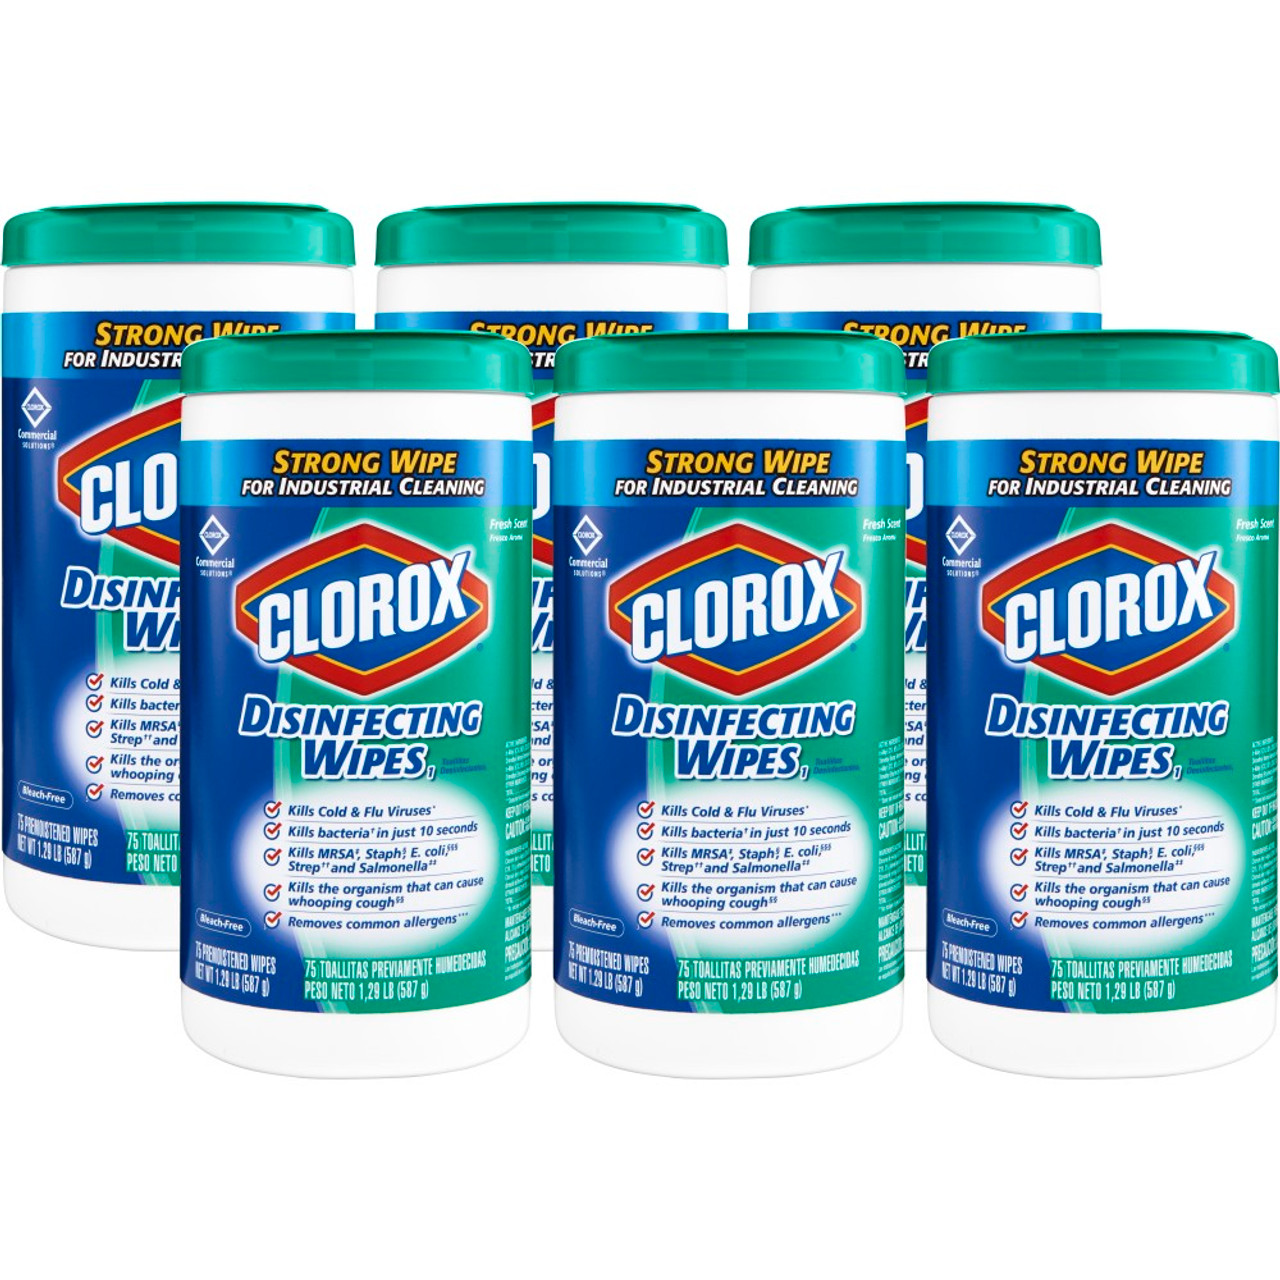 Cleaning wipes. Disinfecting wipes. Clorox commercial. Industrial wet wipes. Kills Cold Flu viruses.